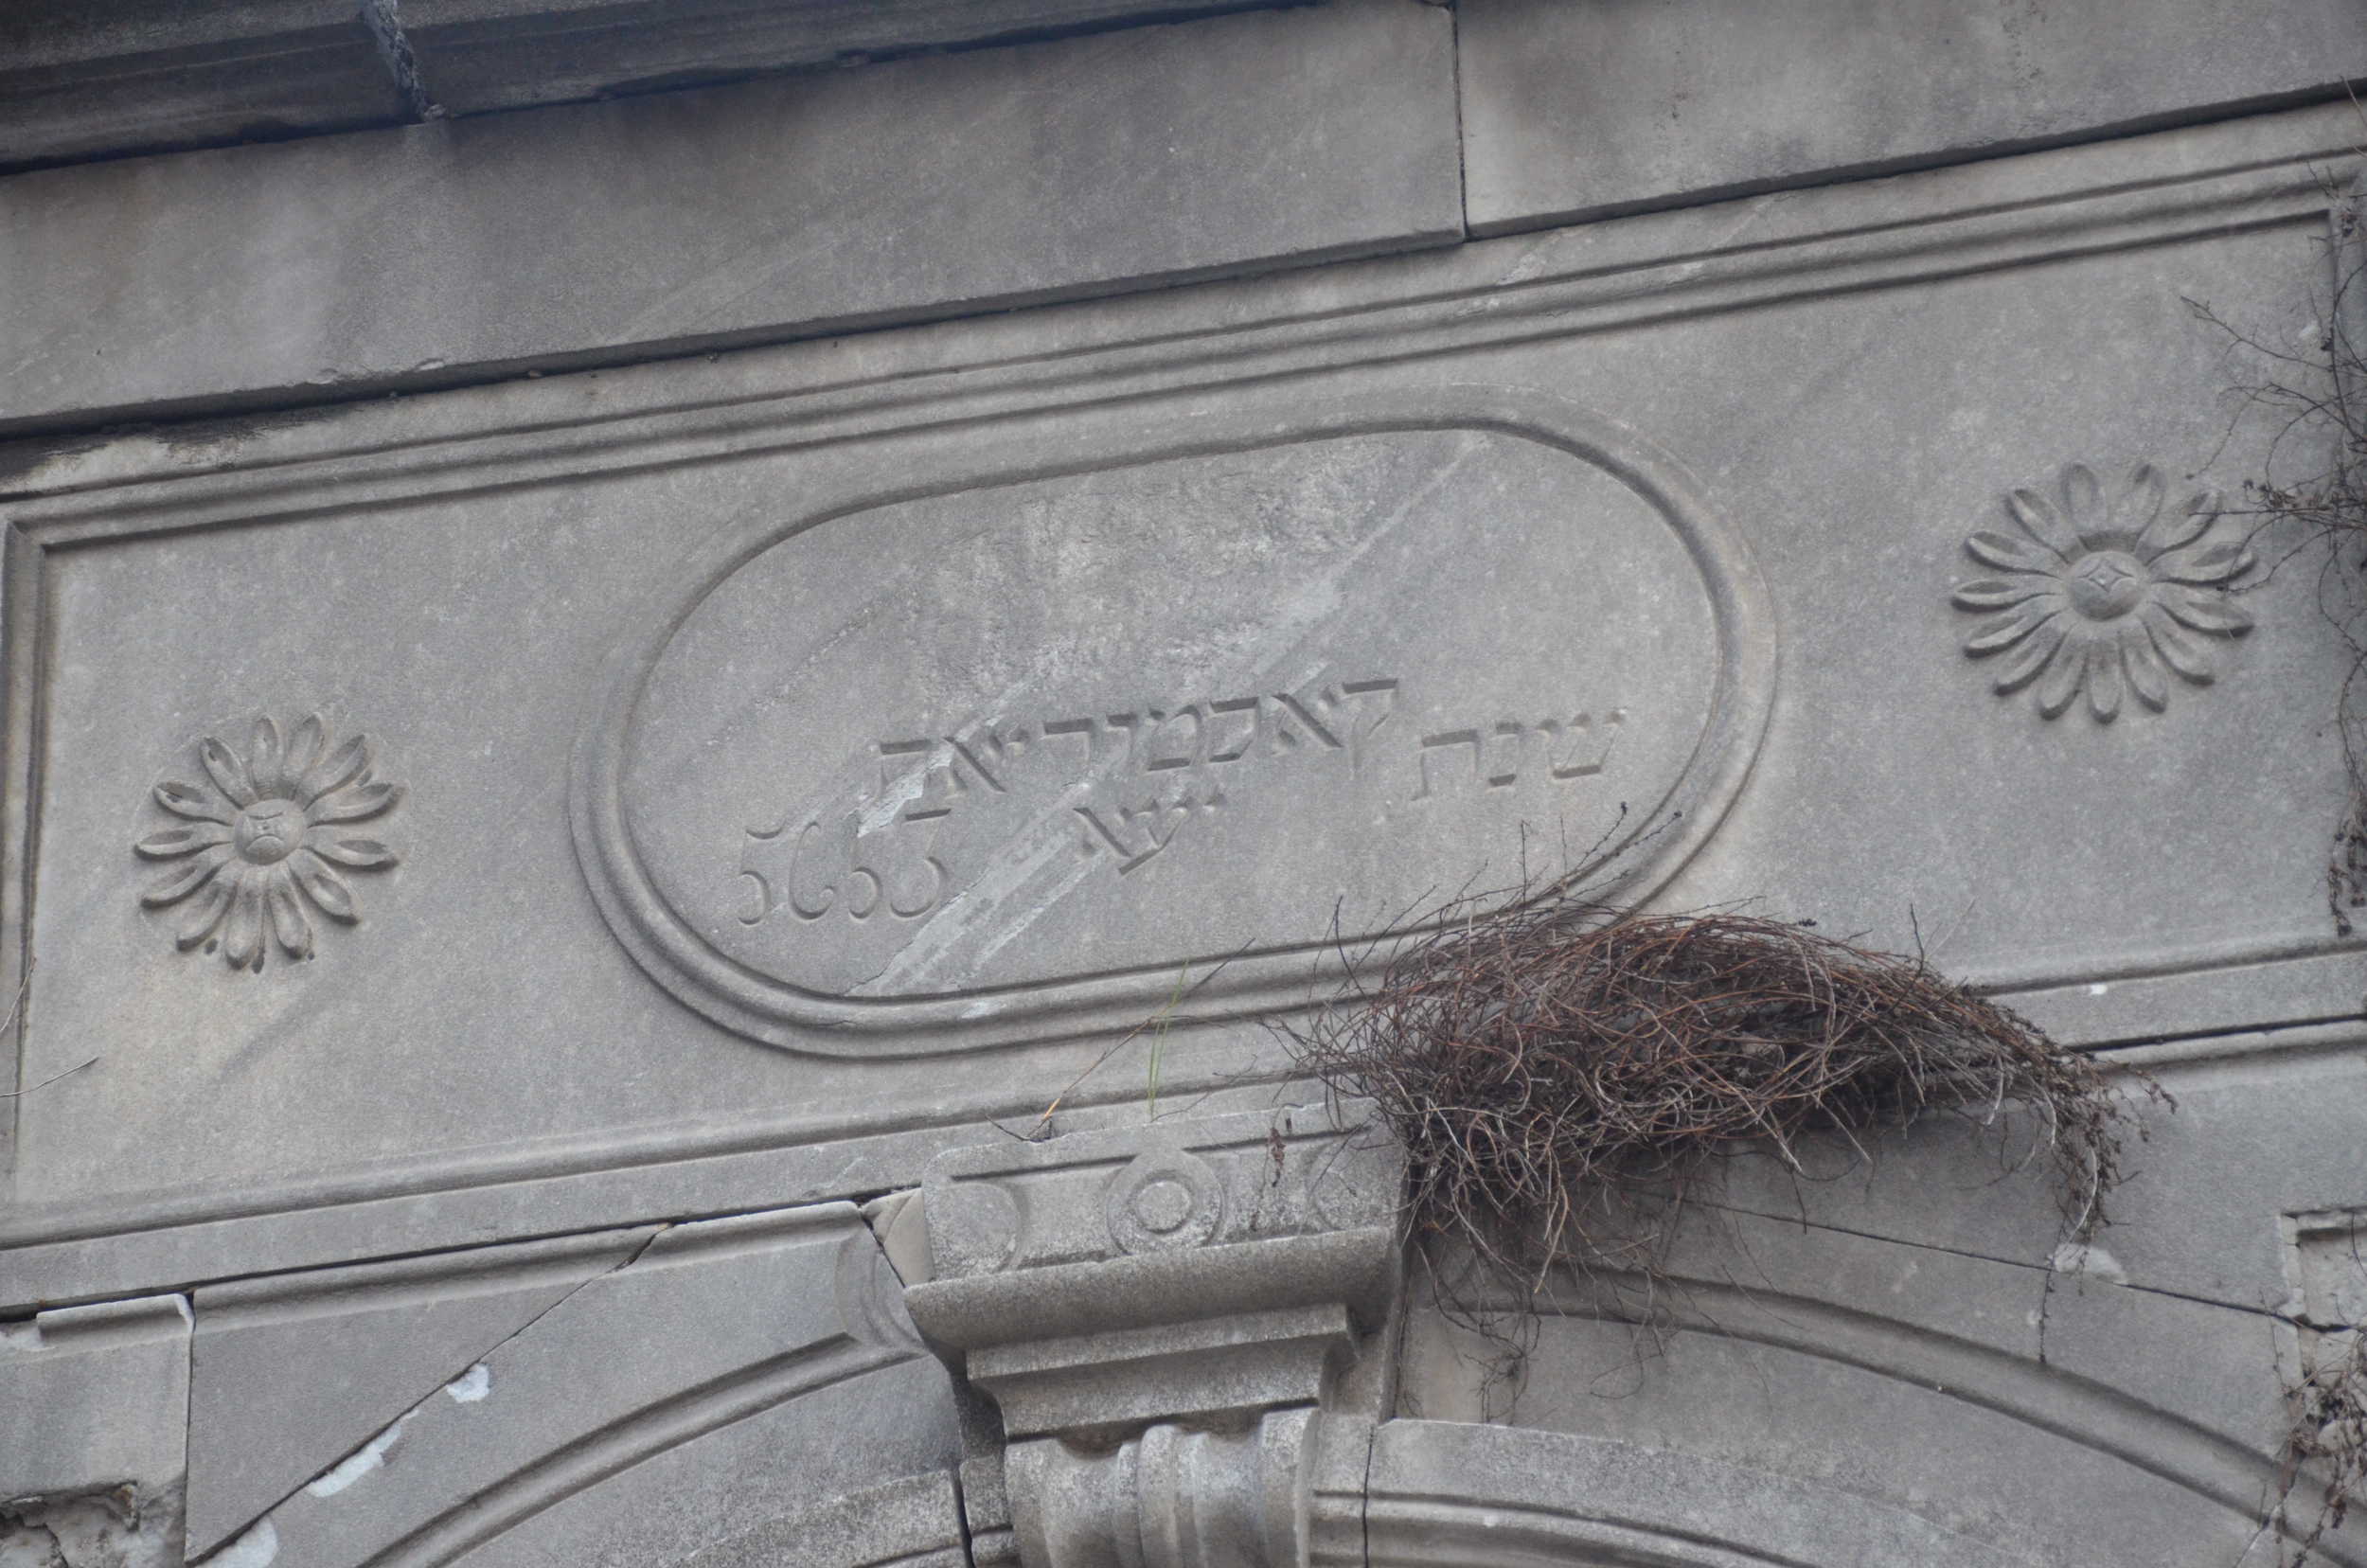 Inscription on the gate to the Kasturya Synagogue in Ayvansaray, Istanbul, Turkey